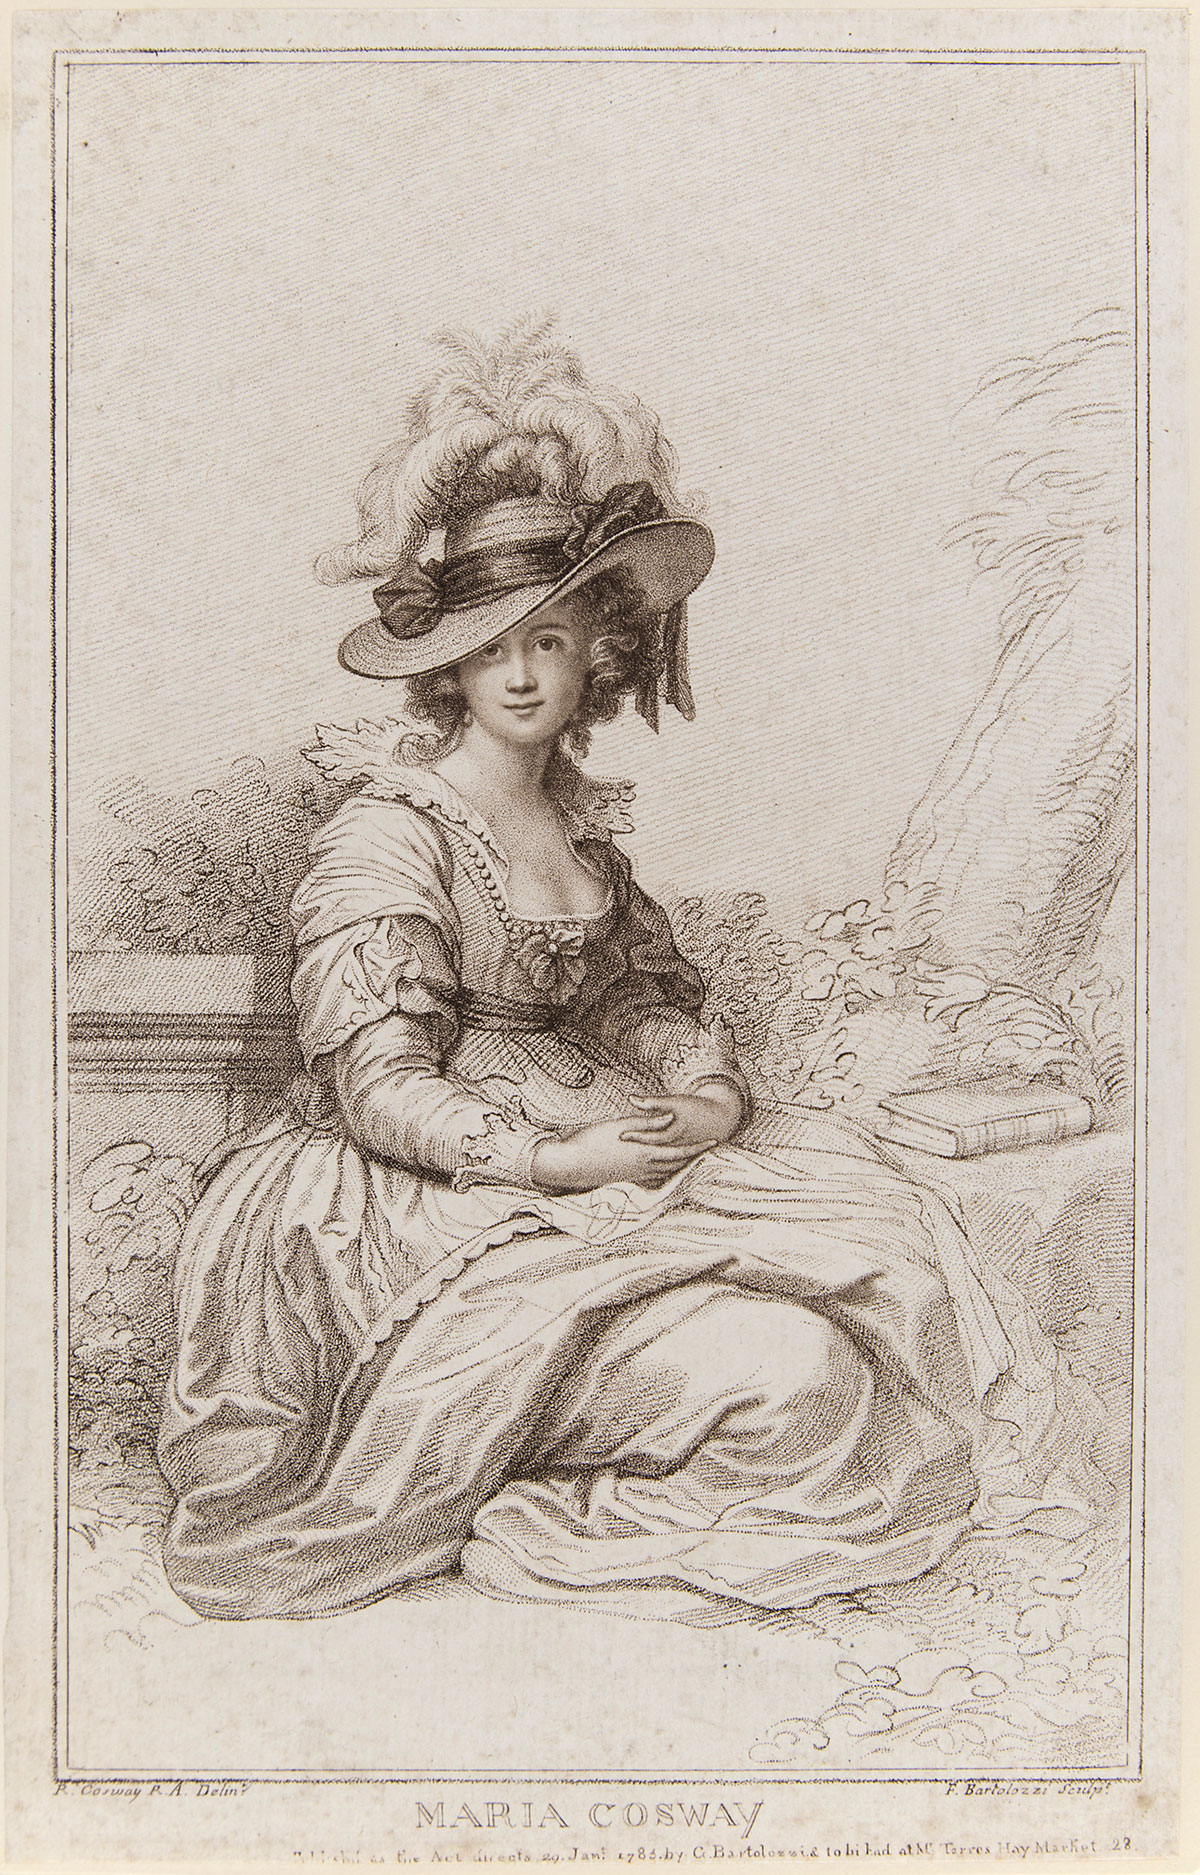 Cosway and Robinson: 2014.EL.1.5 Image: Francesco Bartolozzi Italian, 1727­1815 after Richard Cosway British, 1742­1821 Maria Cosway, 1785 Stipple and engraving 9 1/2 x 6 1/8 in (24.1 x 15.6 cm) Lent by the Langhorne Collection, 2014.EL.1.5